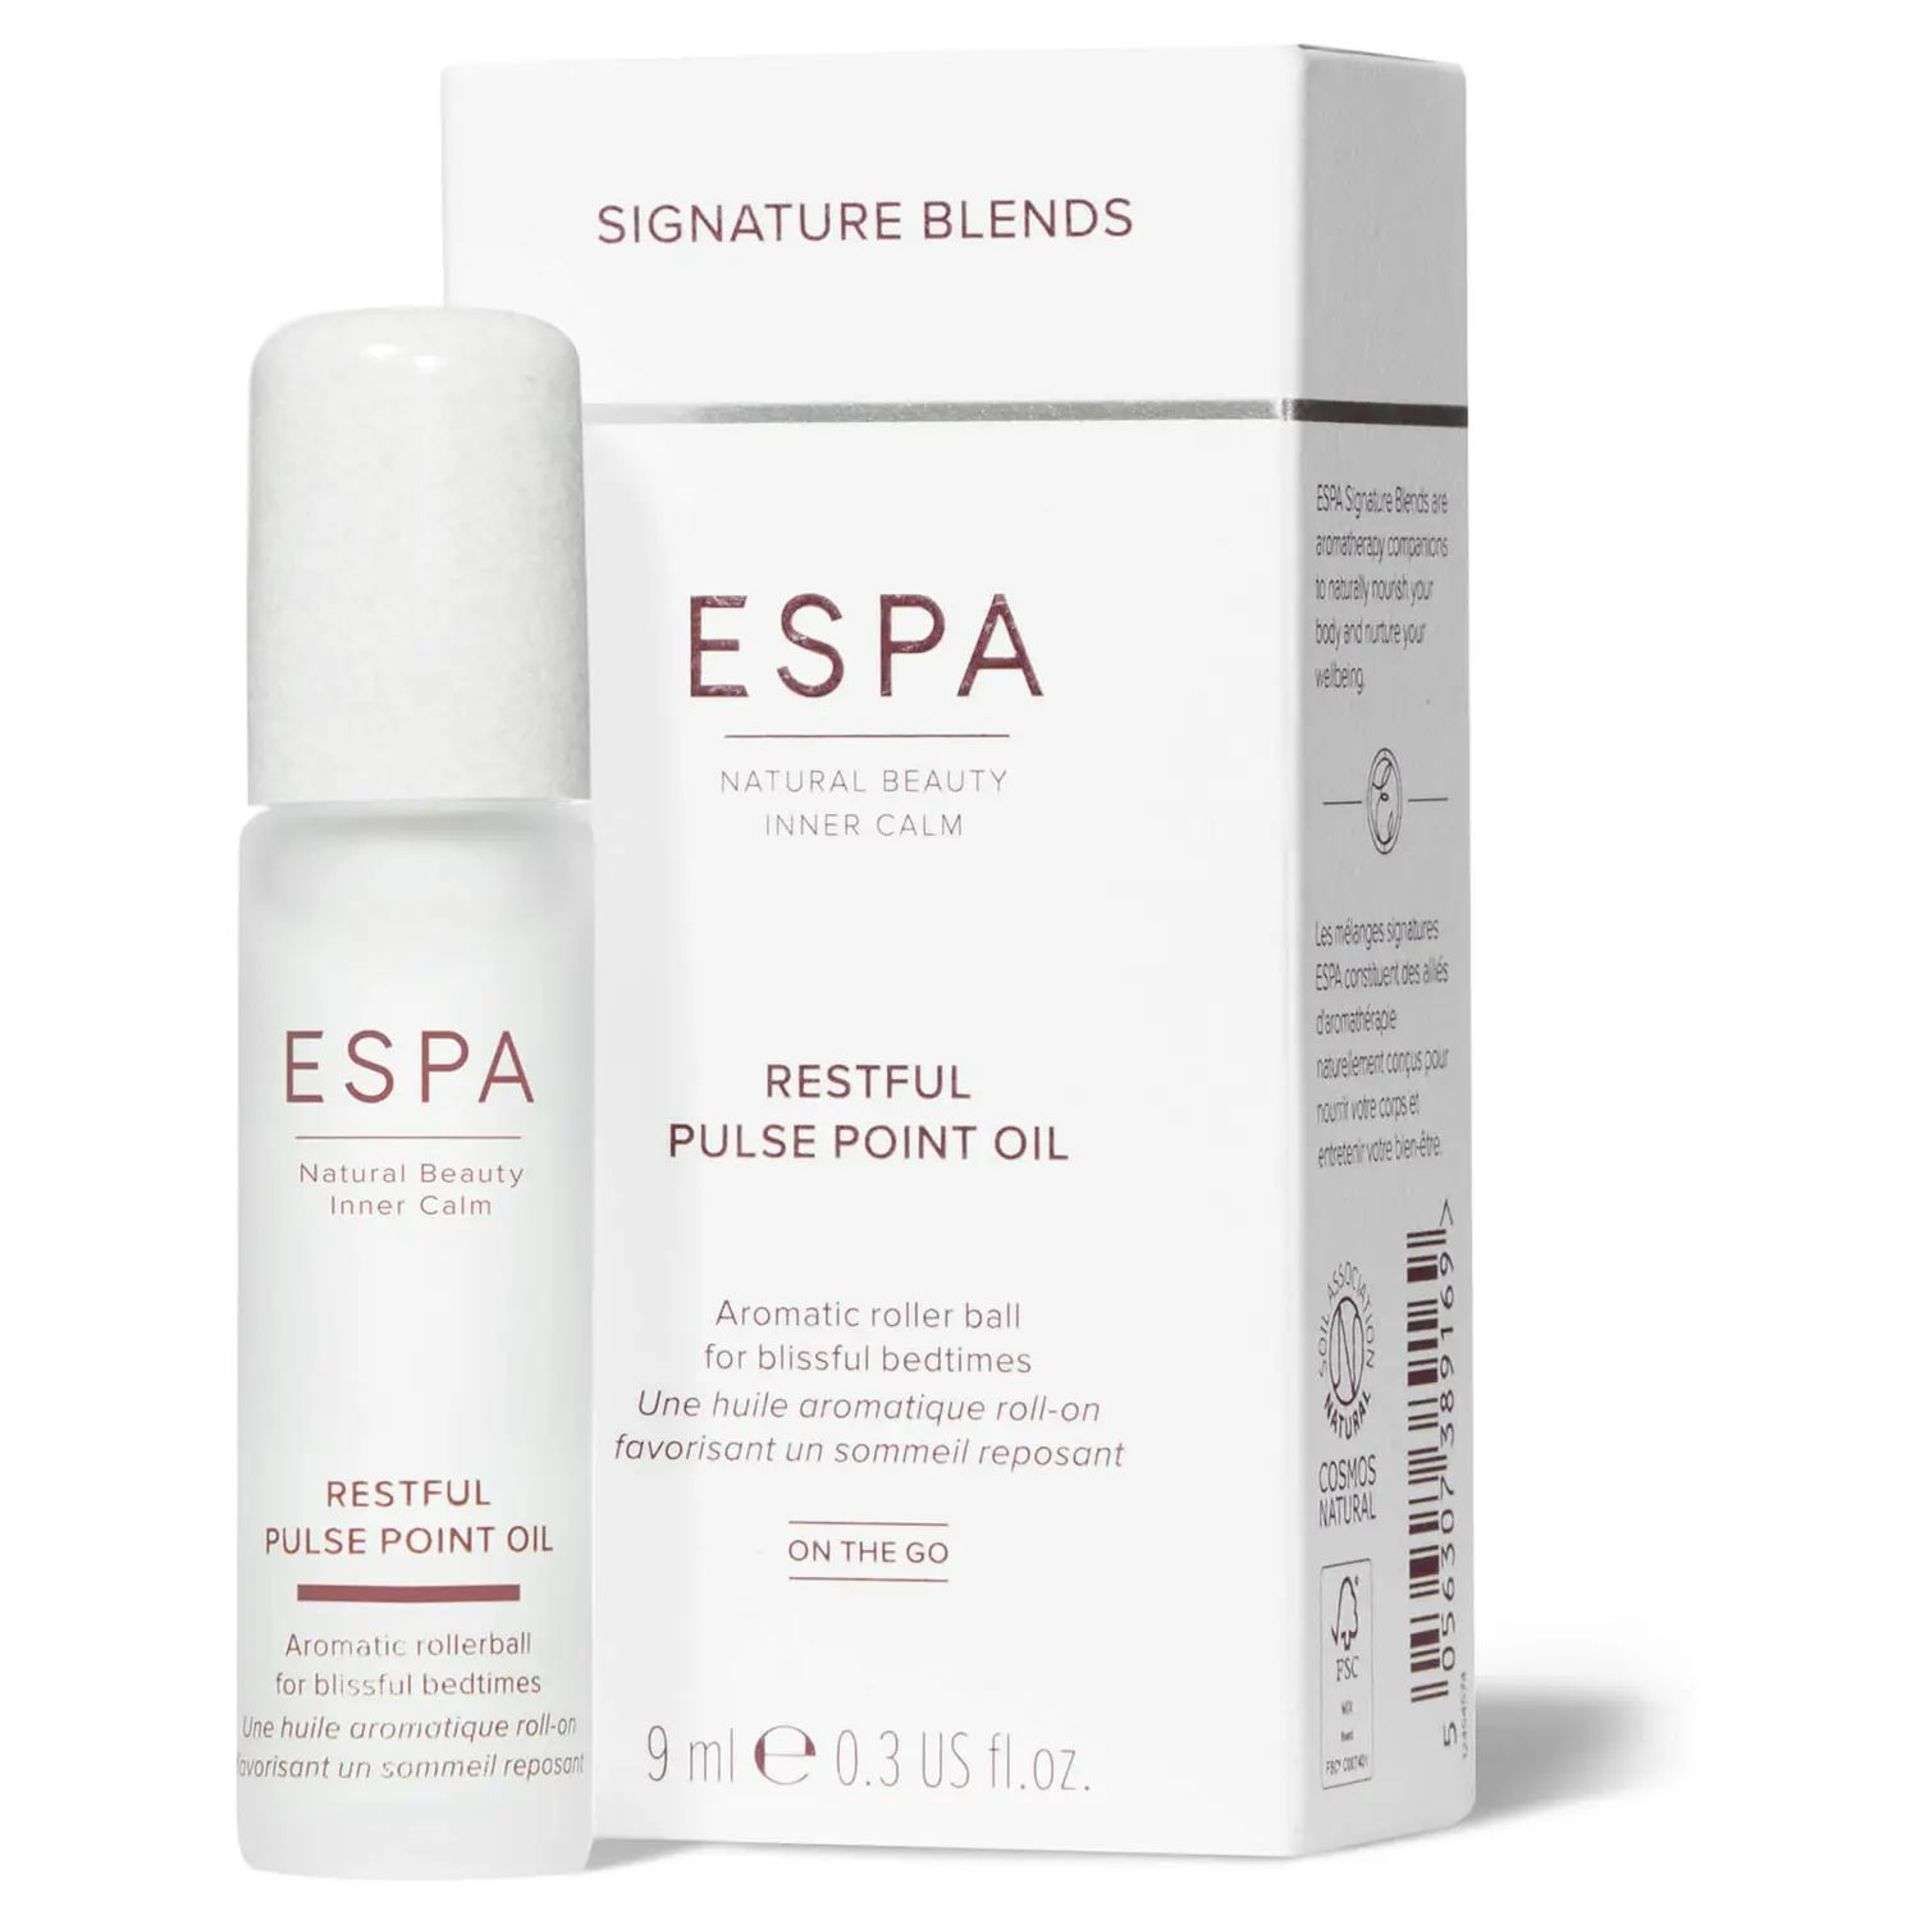 TRADE LOT TO CONTAIN 48x BRAND NEW ESPA Restful Pulse Point Oil 9ml. RRP £21 EACH. EBR4/R12-16. A